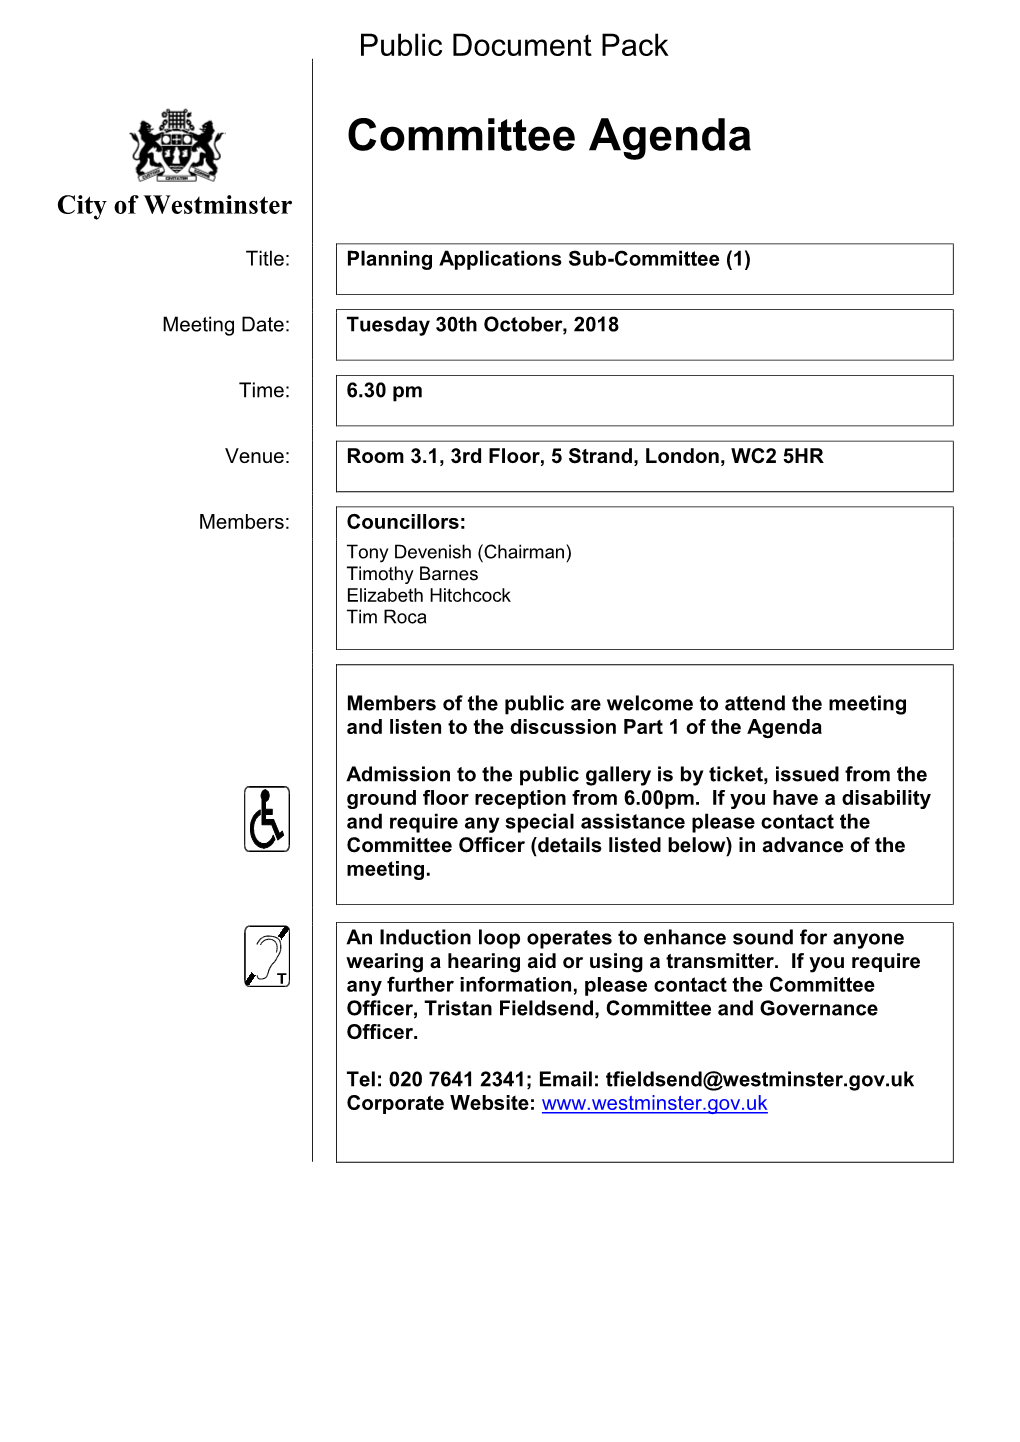 (Public Pack)Agenda Document for Planning Applications Sub